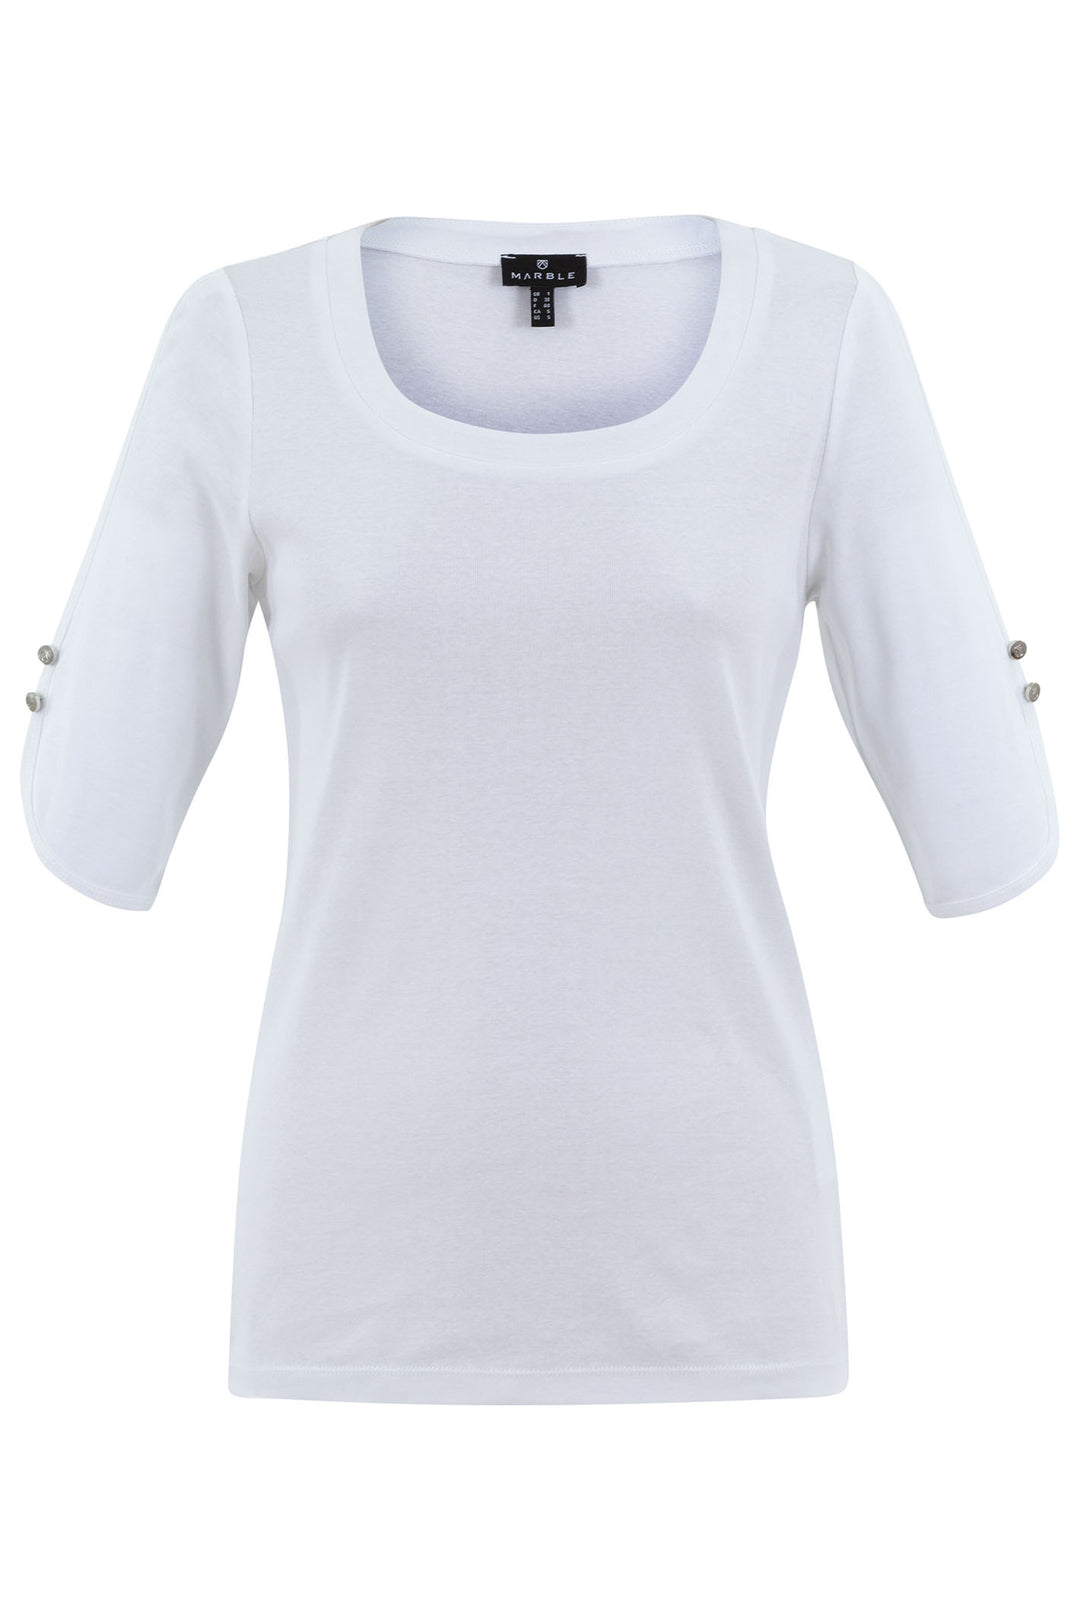 Marble Fashions 7359 102 White Half Sleeve T-Shirt - Experience Boutique